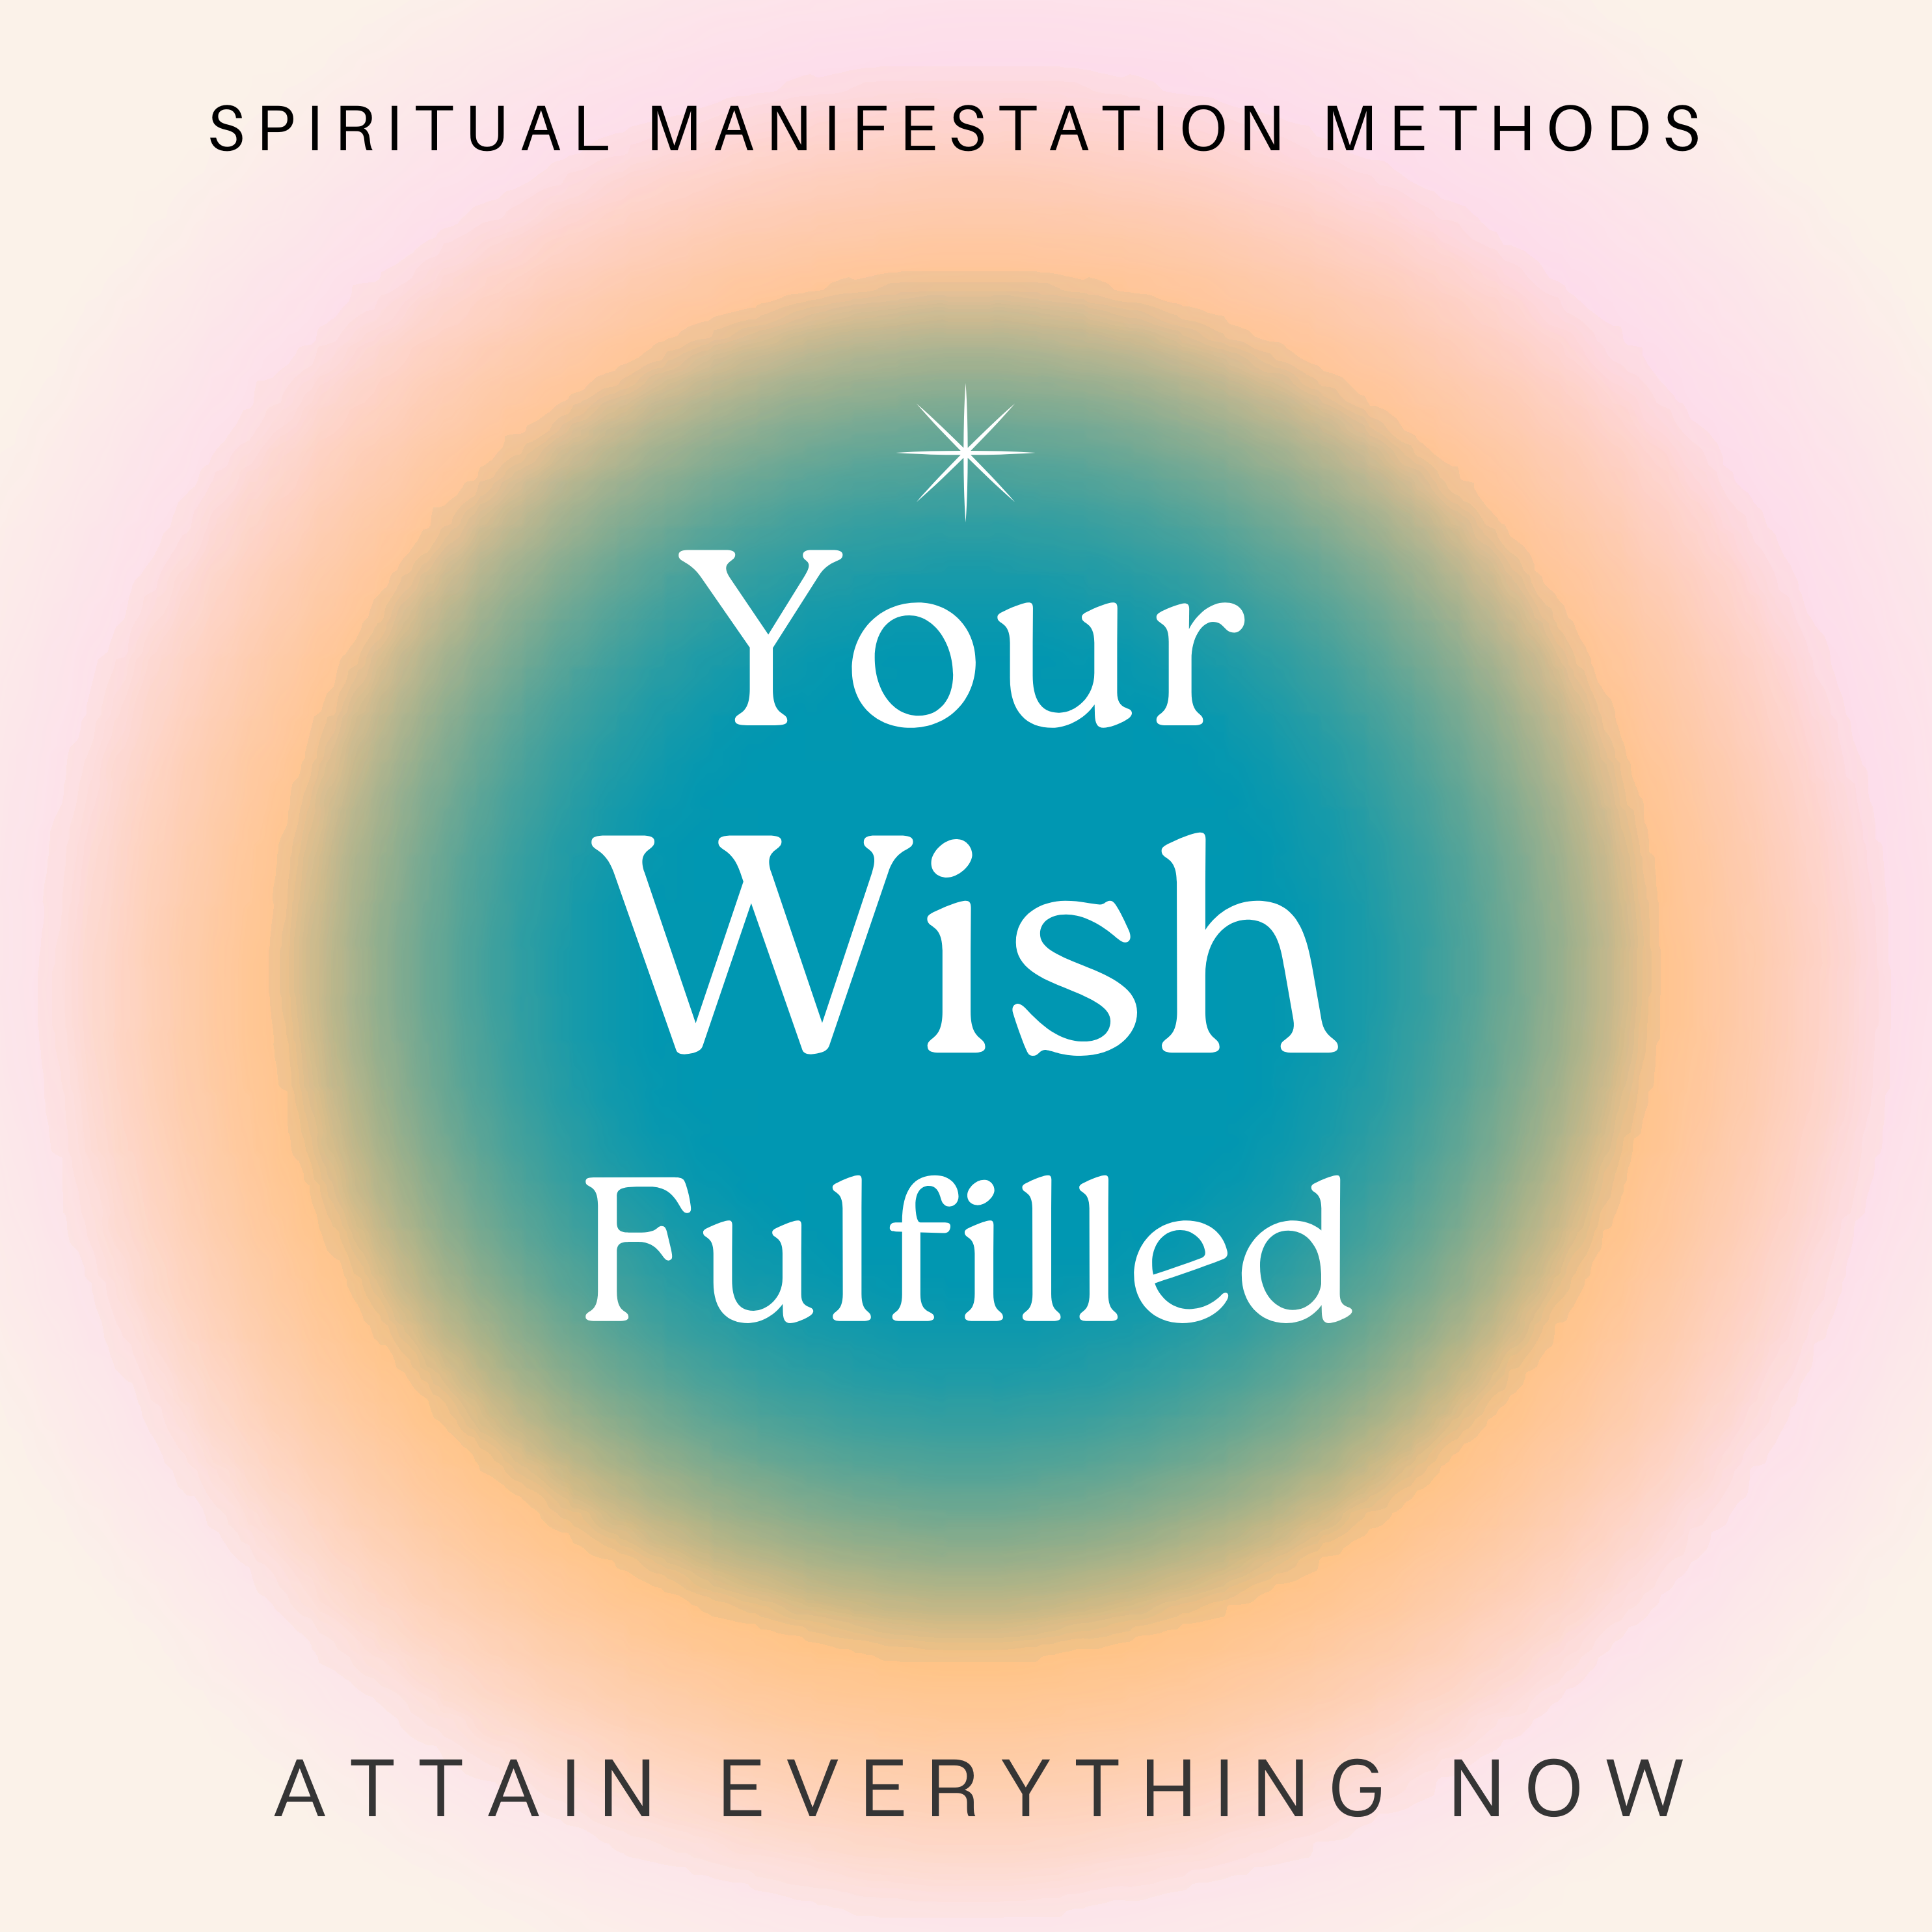 5 Ways to Raise Your Vibration and Attain Everything: Elevating Your Frequency for Effortless Manifestation and Abundance